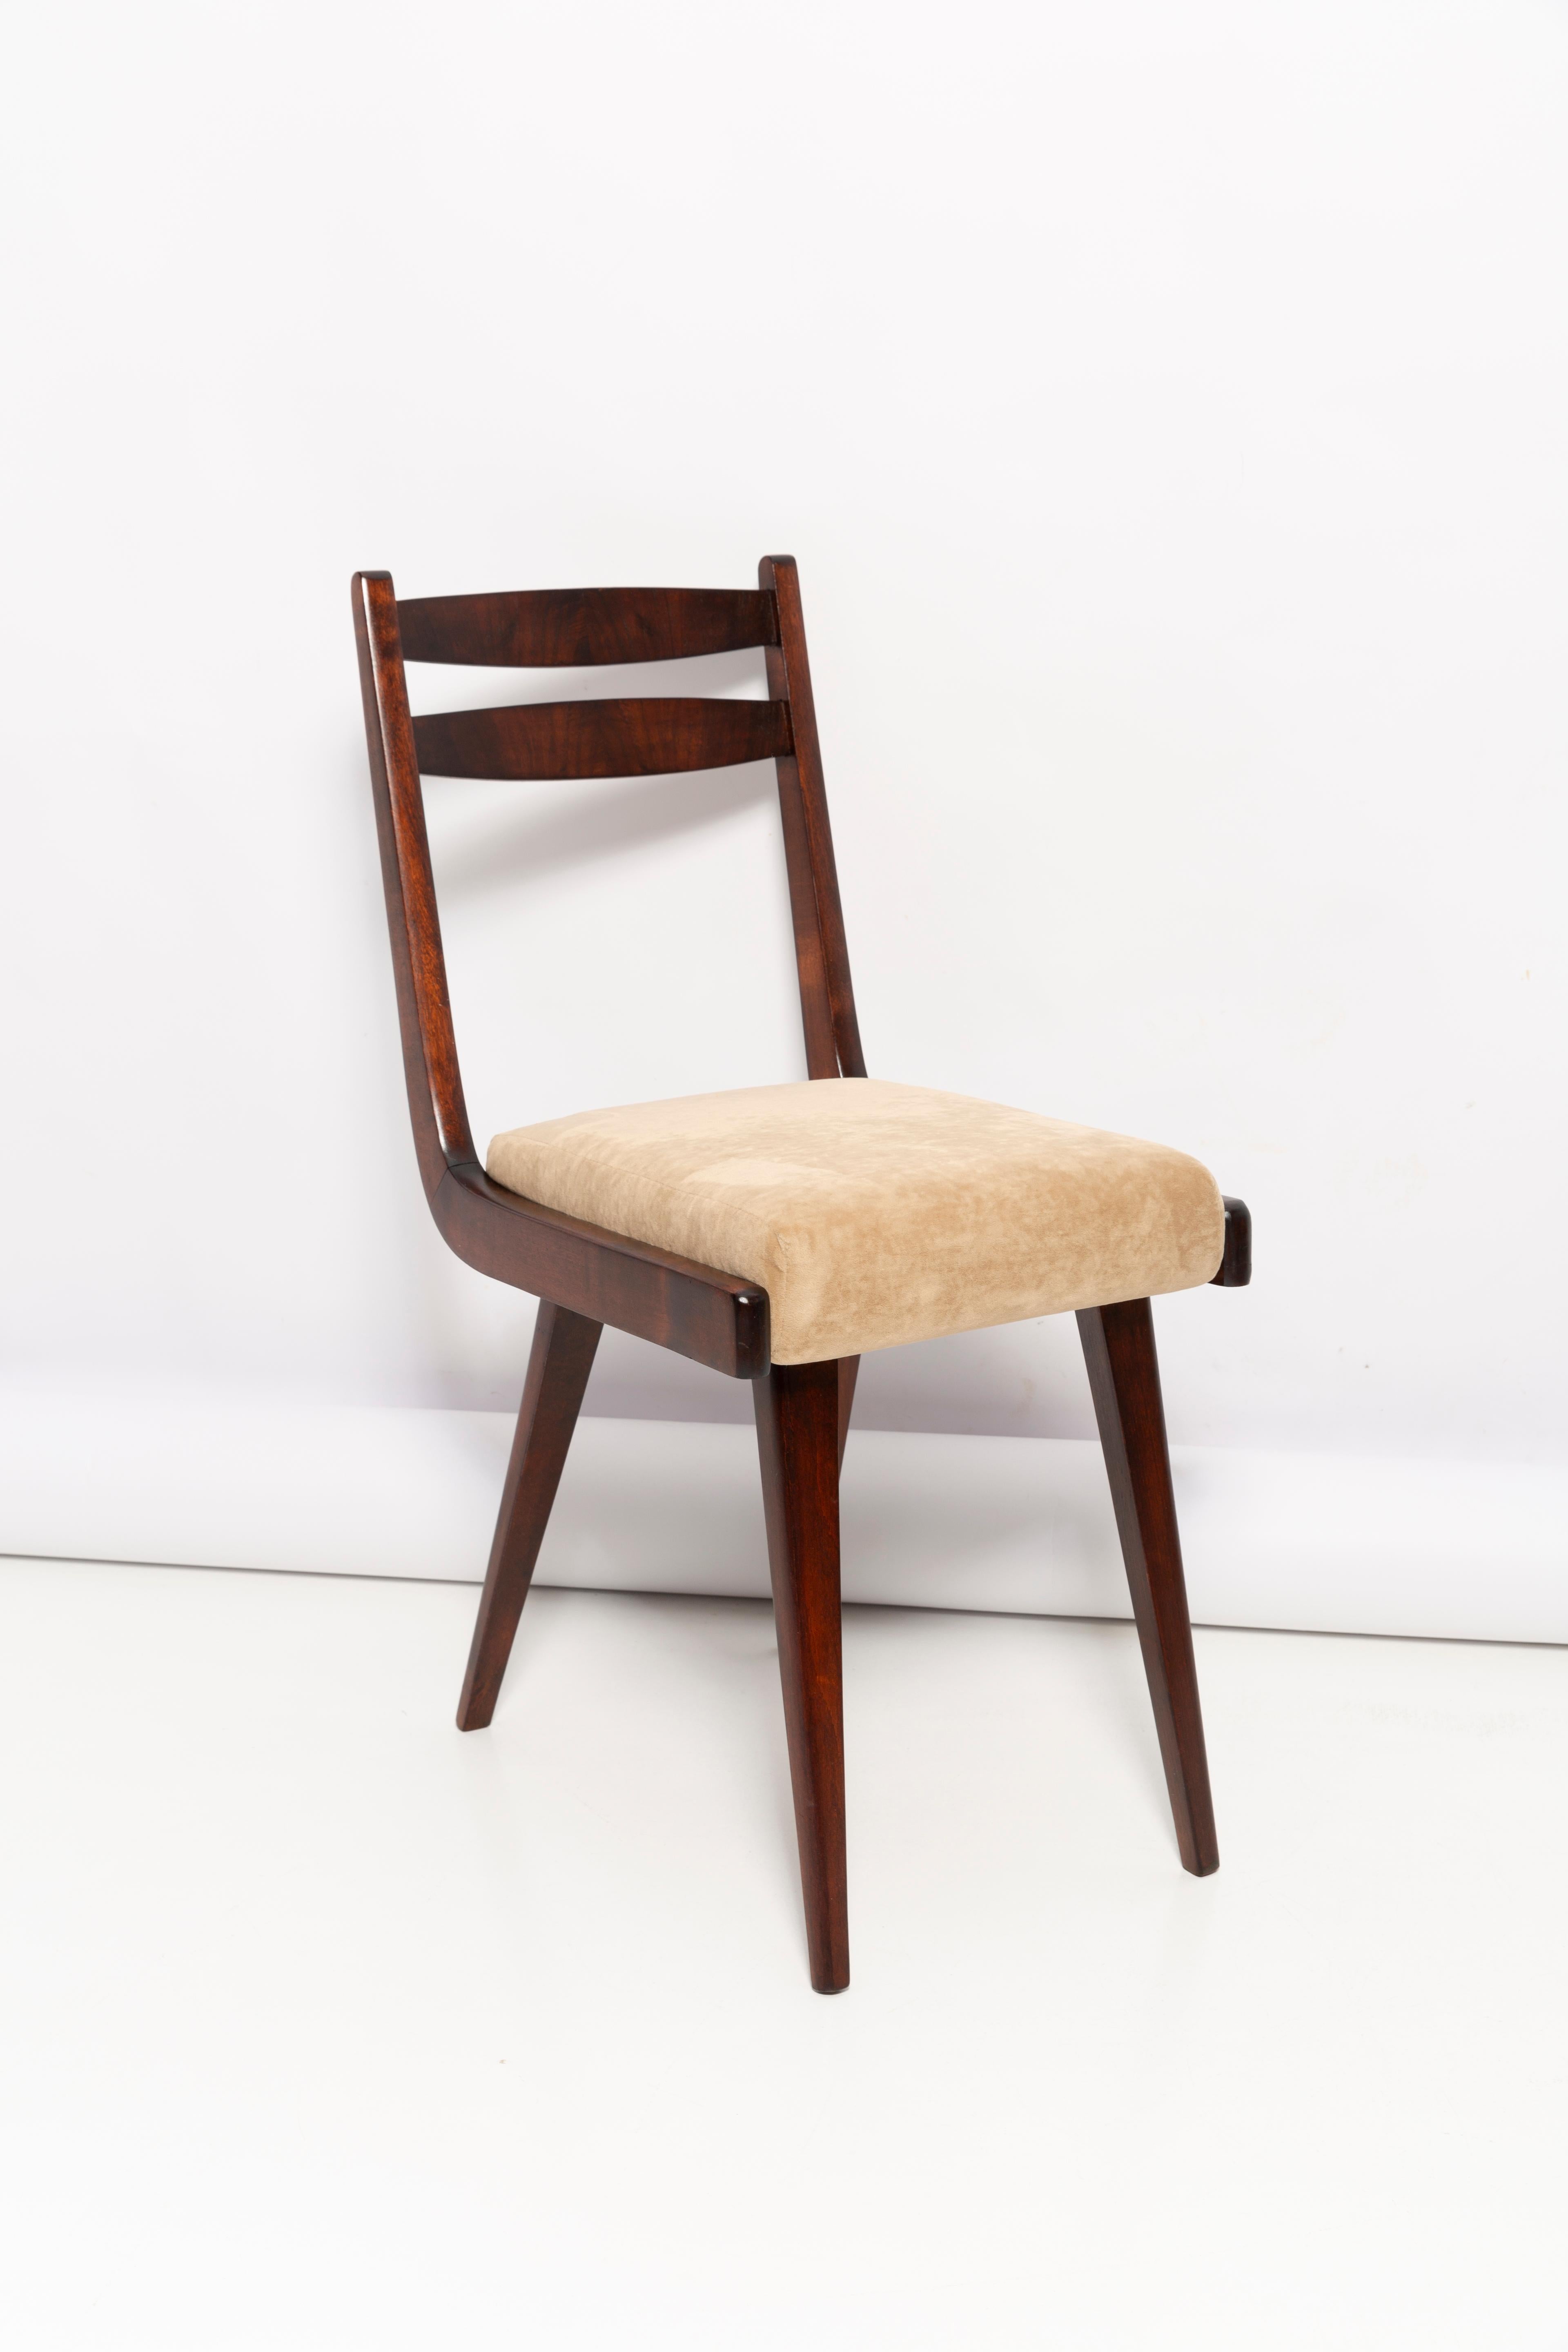 Chairs designed by prof. Rajmund Halas. They have been made of beechwood. They have undergone a complete upholstery renovation, the woodwork has been refreshed. Seats were dressed in beige soft velvet. They are stabile and very shapely. Chairs were